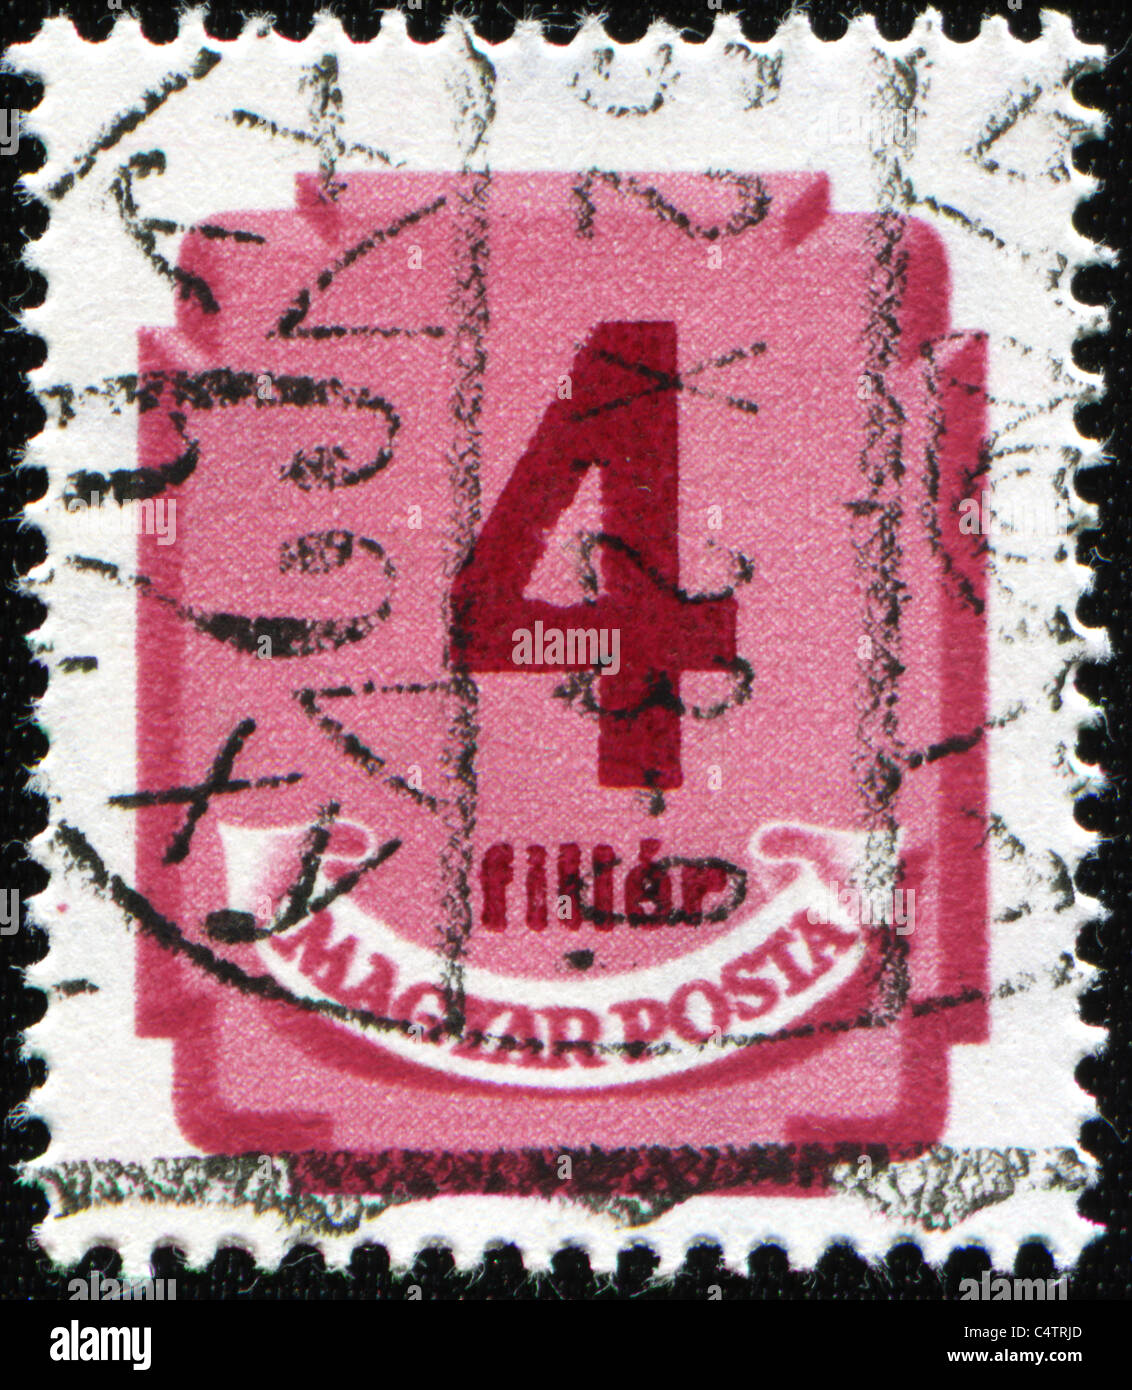 HUNGARY - CIRCA 1946: A Hungarian Used Postage Stamp showing 4 filler, circa 1946 Stock Photo